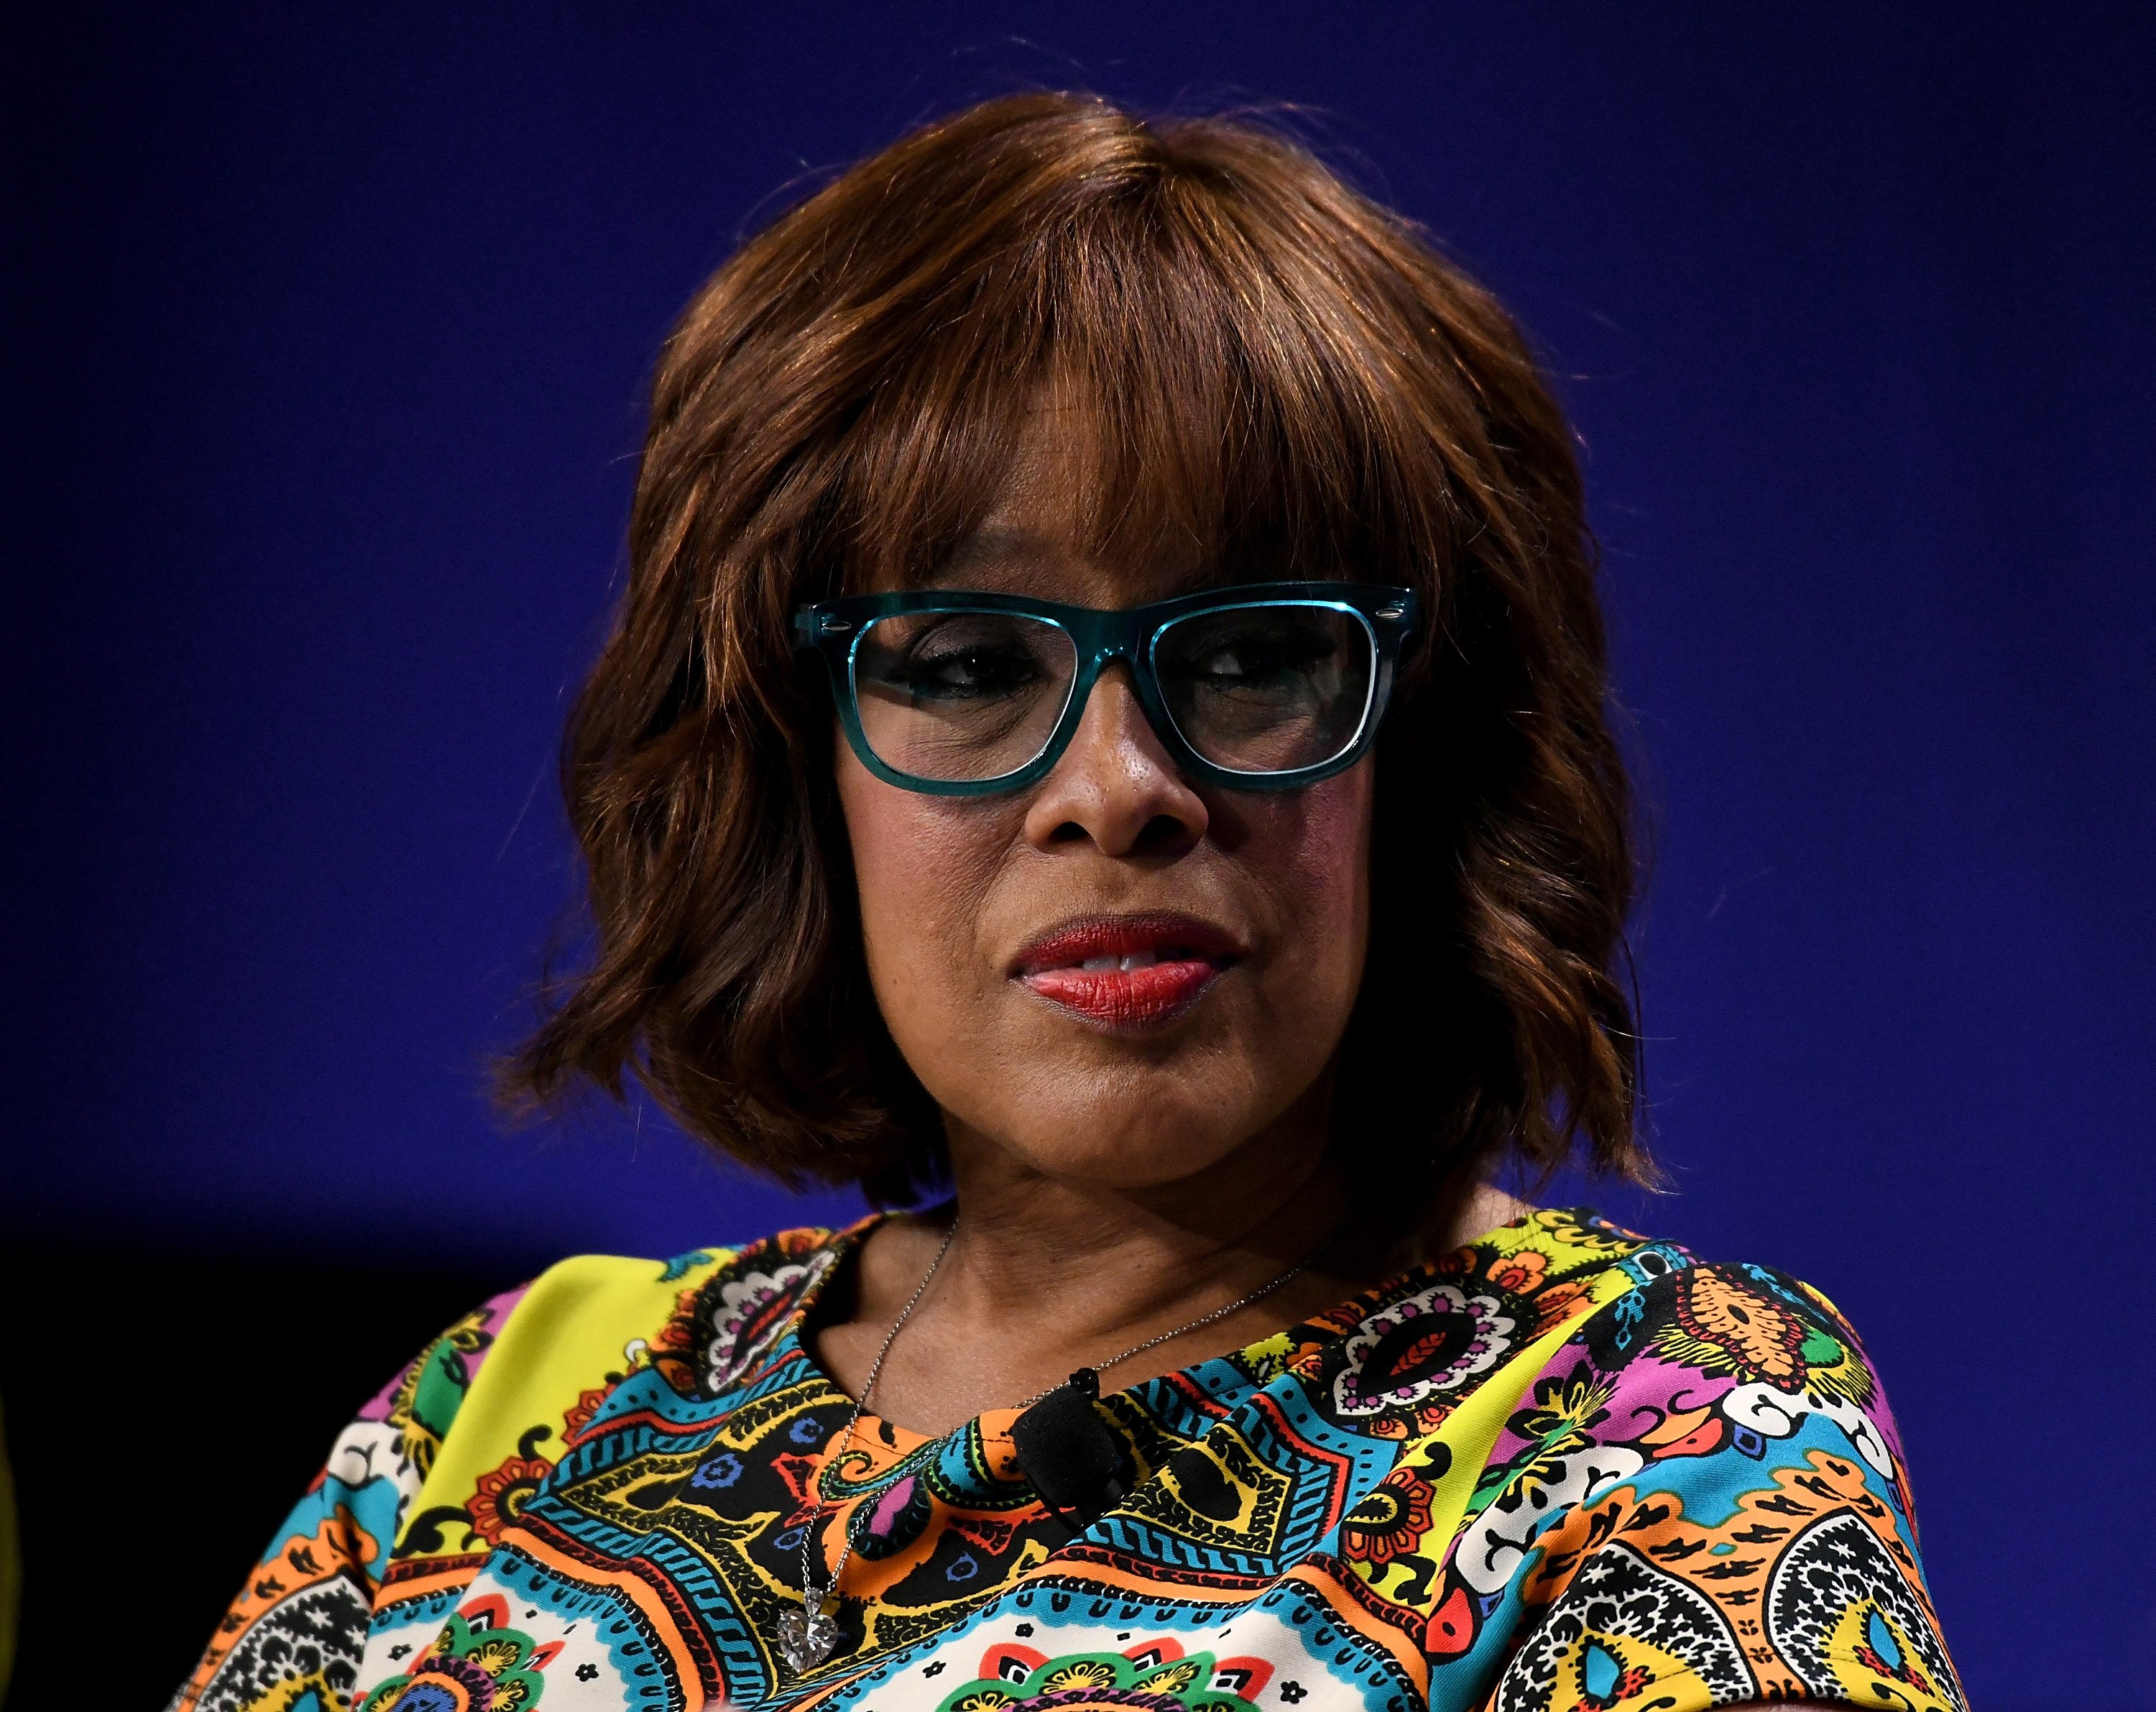  Gayle King, Co-Host, CBS This Morning, participates in a panel discussion during the annual Milken Institute Global Conference at The Beverly Hilton Hotel on April 29, 2019 | Photo: GettyImages